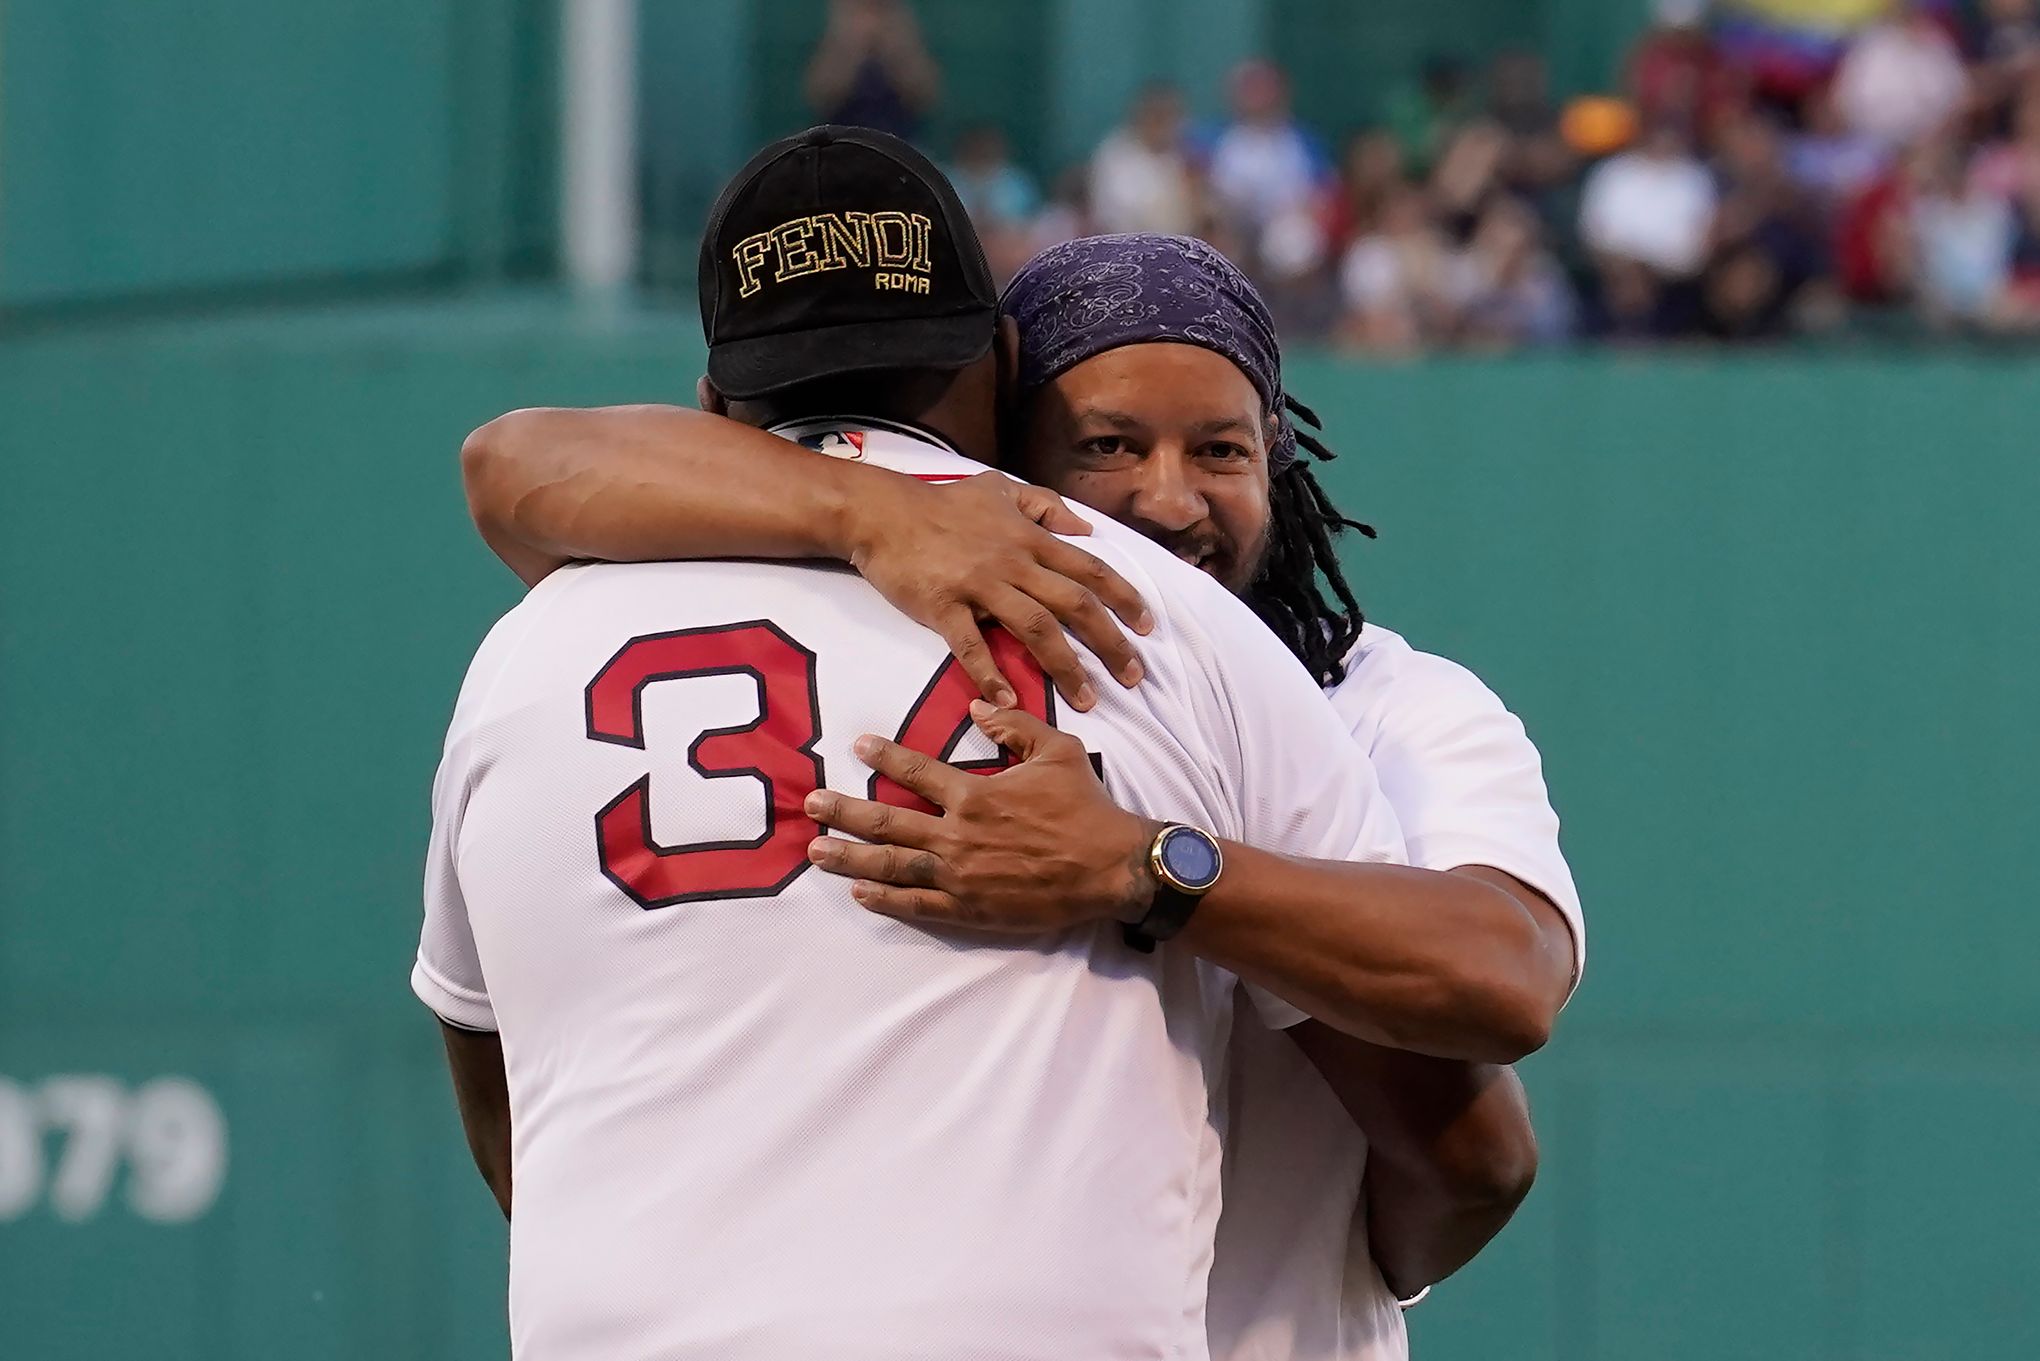 Hall of Fame: Don't look for Manny Ramirez anytime soon - Sports